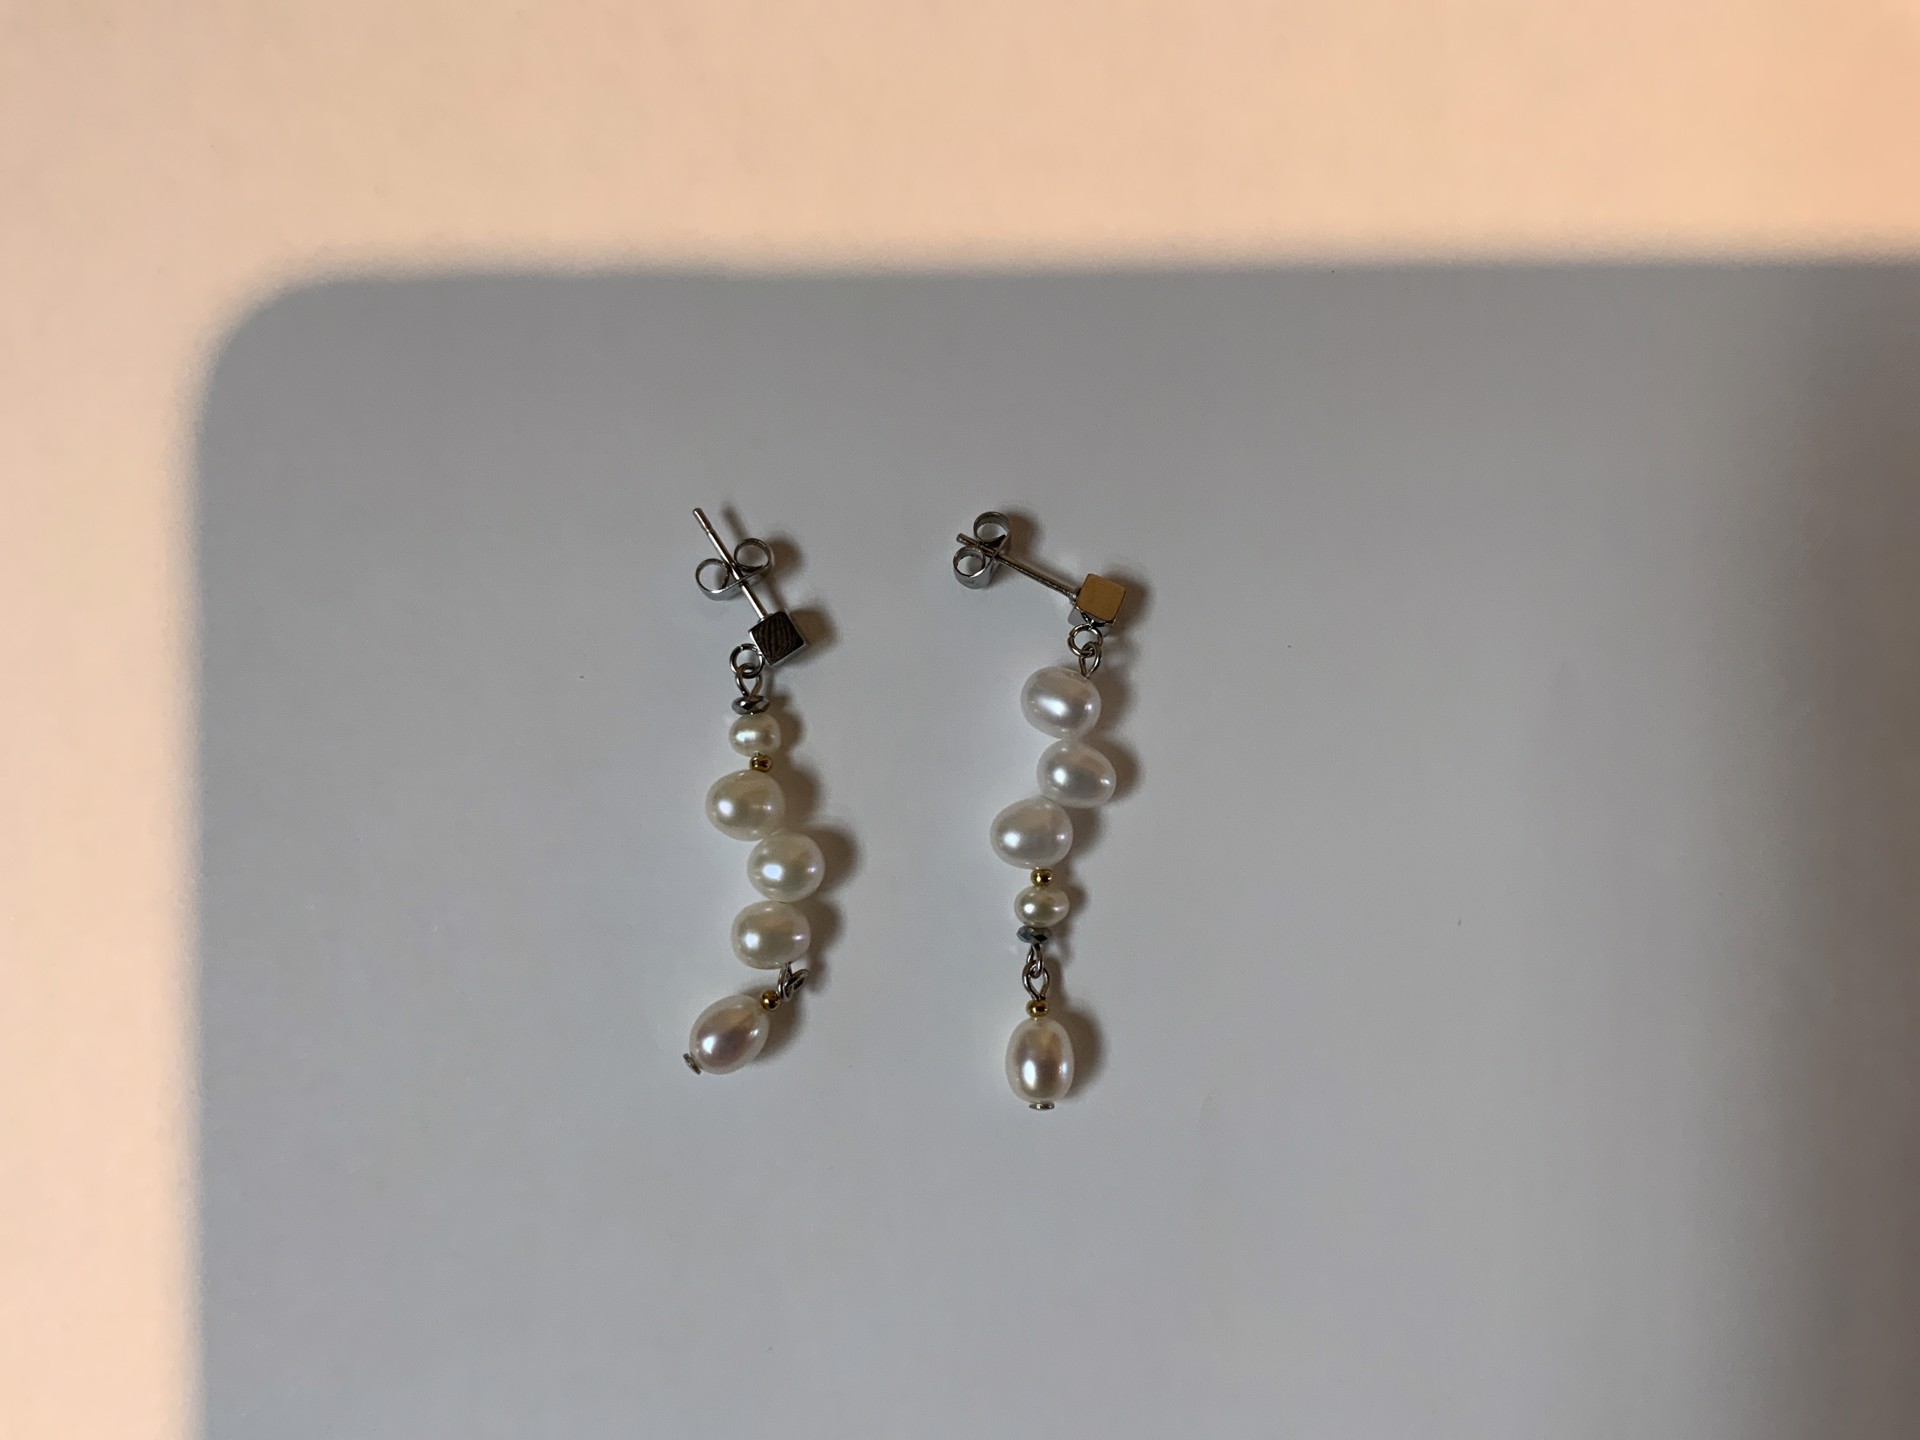 Sterling Silver Bar and Pearl Earrings by Coeur de Lion Nikaia Inc.